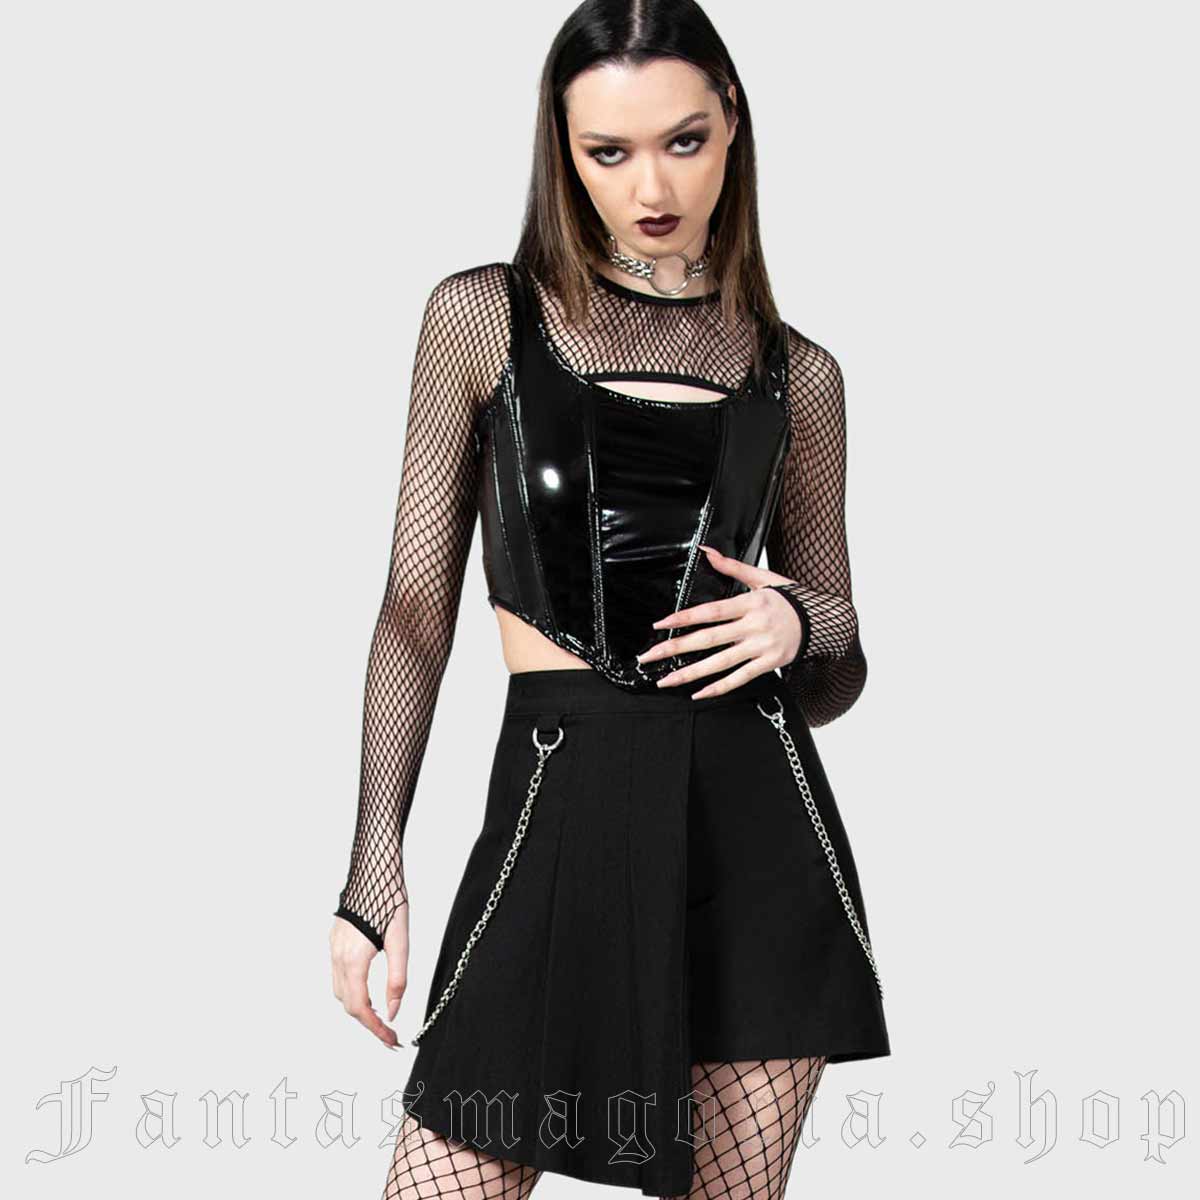 Women's Victorian Gothic Black Faux Leather Underbust Corset With